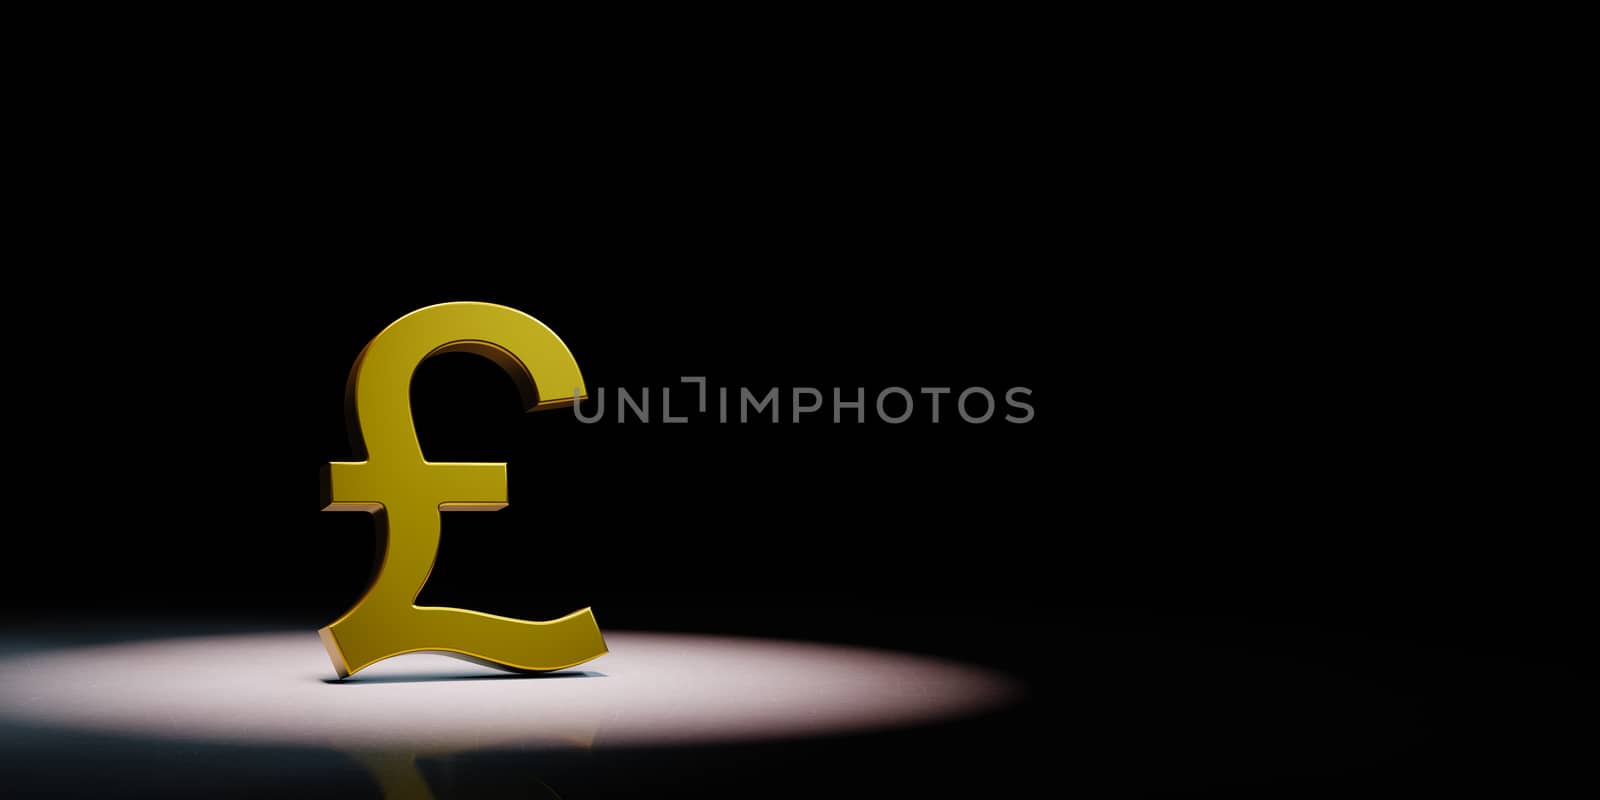 Pound British Currency Sign Spotlighted on Black Background by make